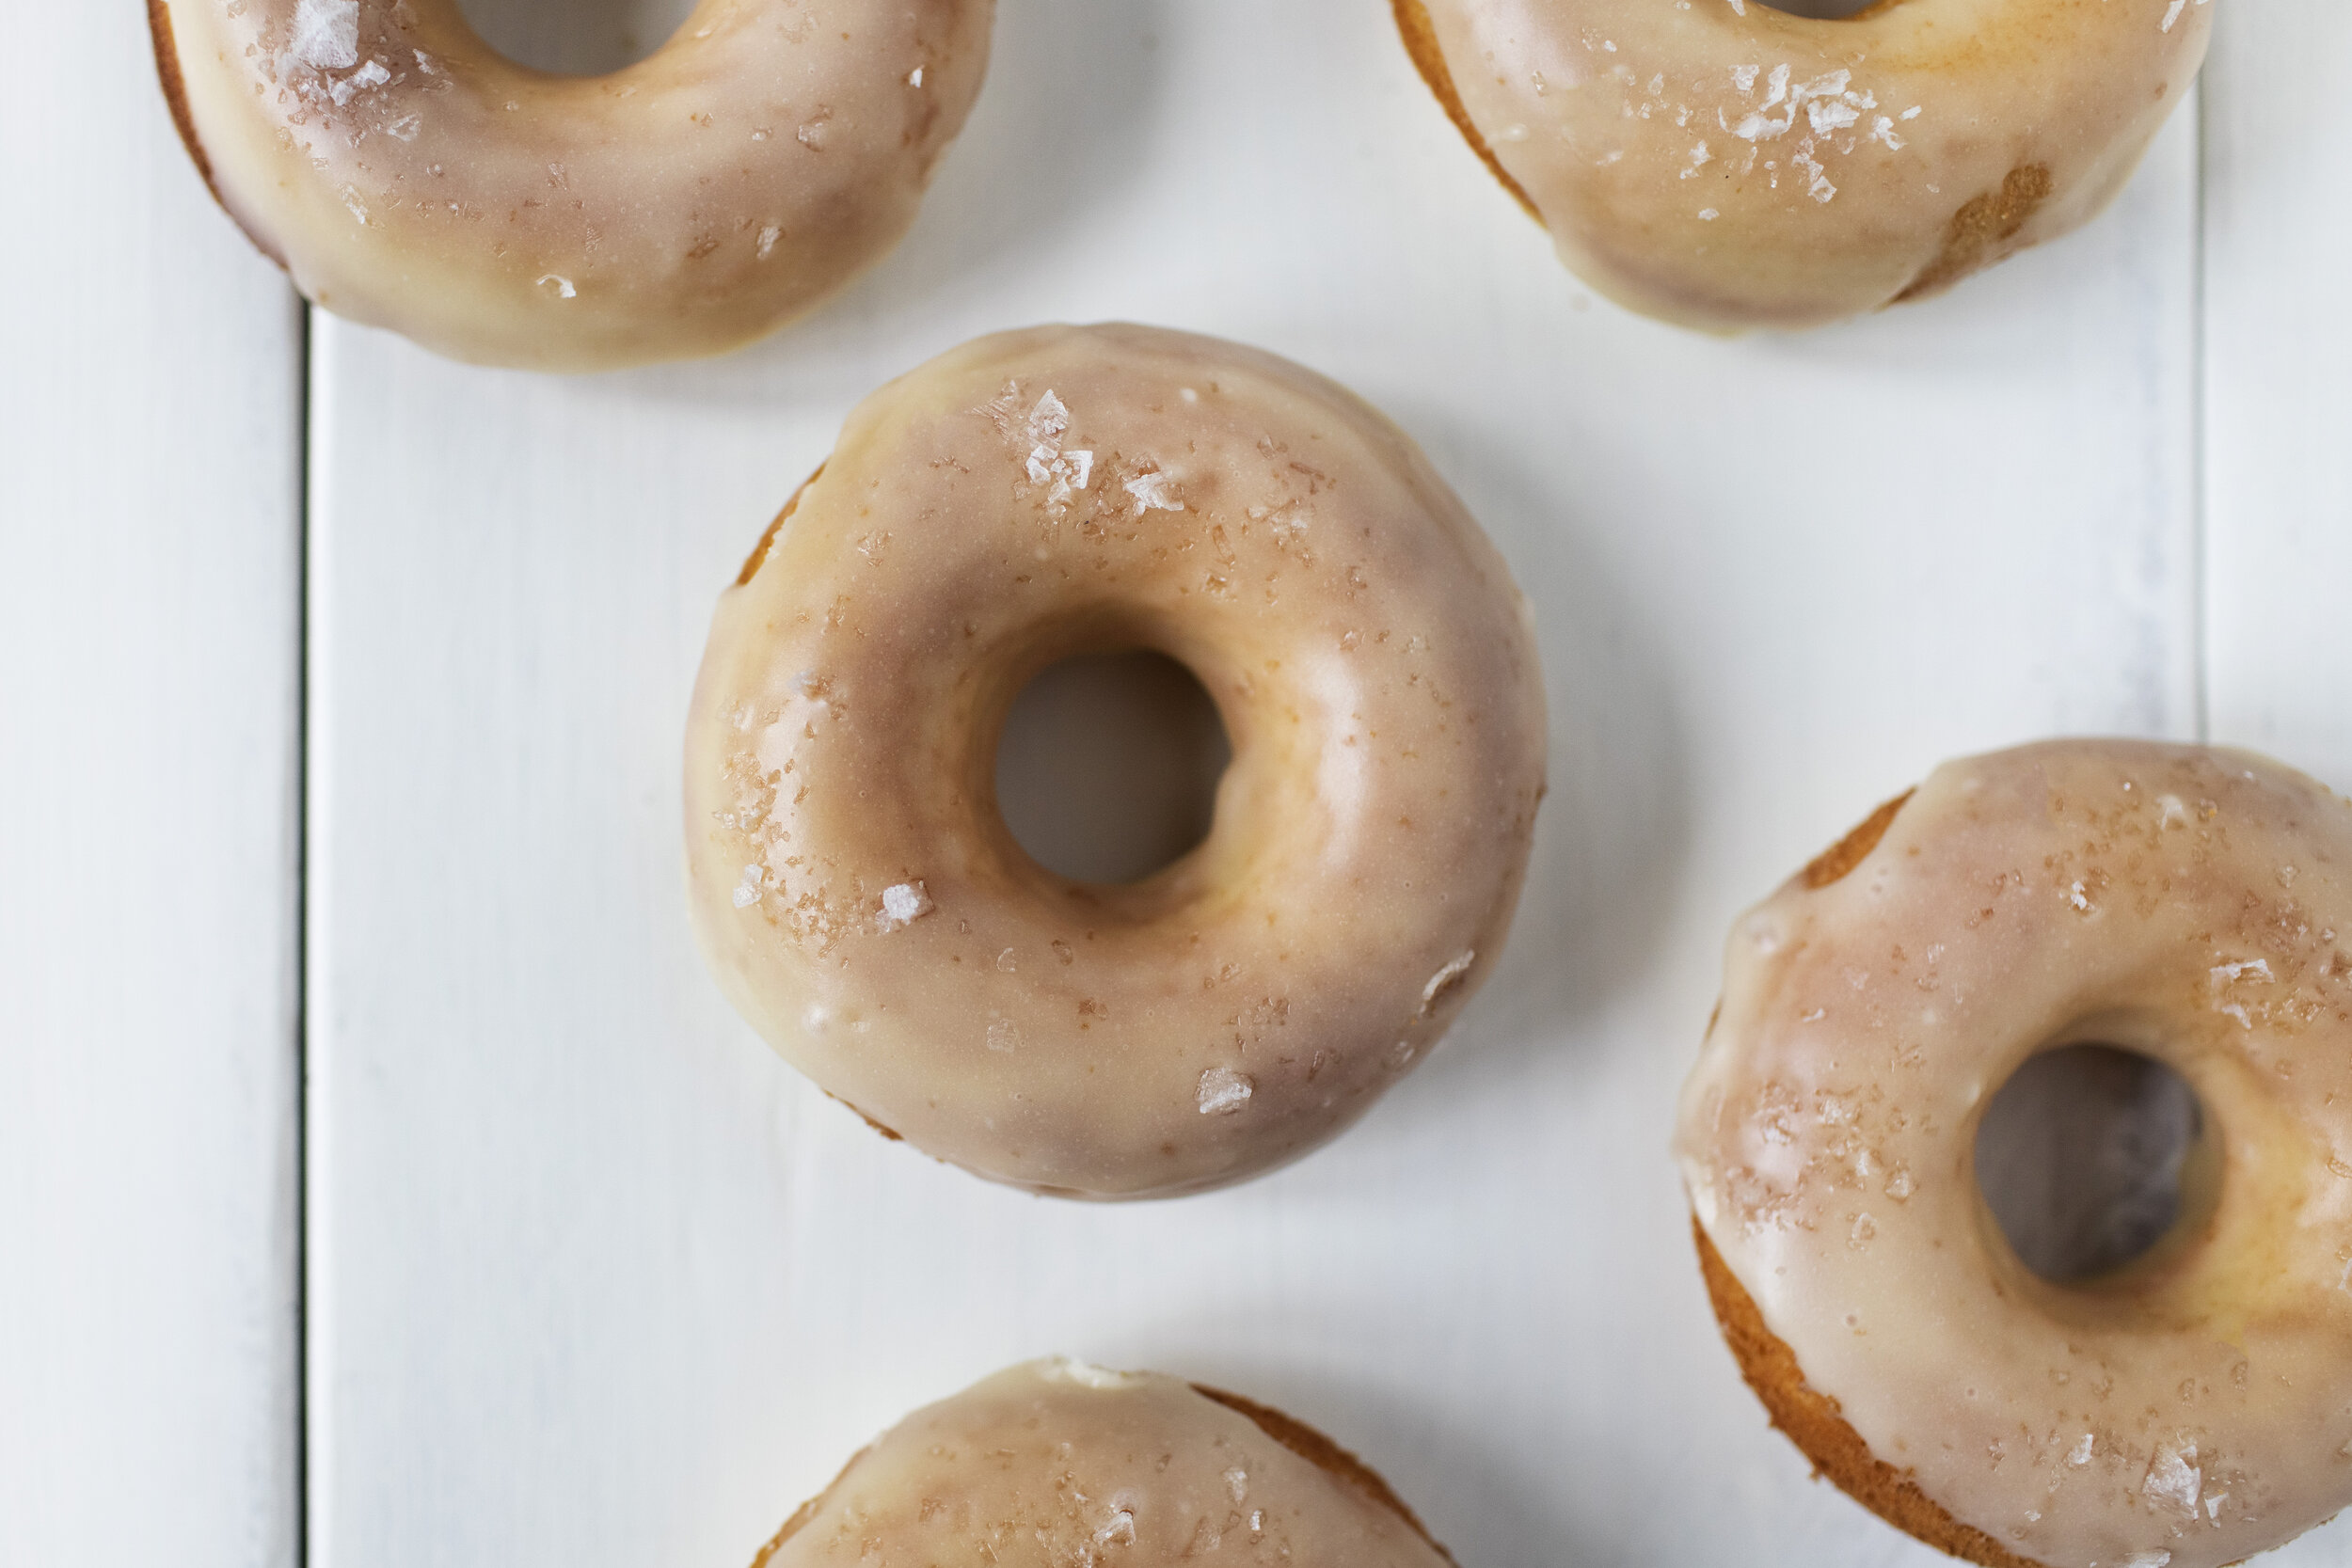 Baked Donuts with Cosman &amp; Webb Maple Syrup